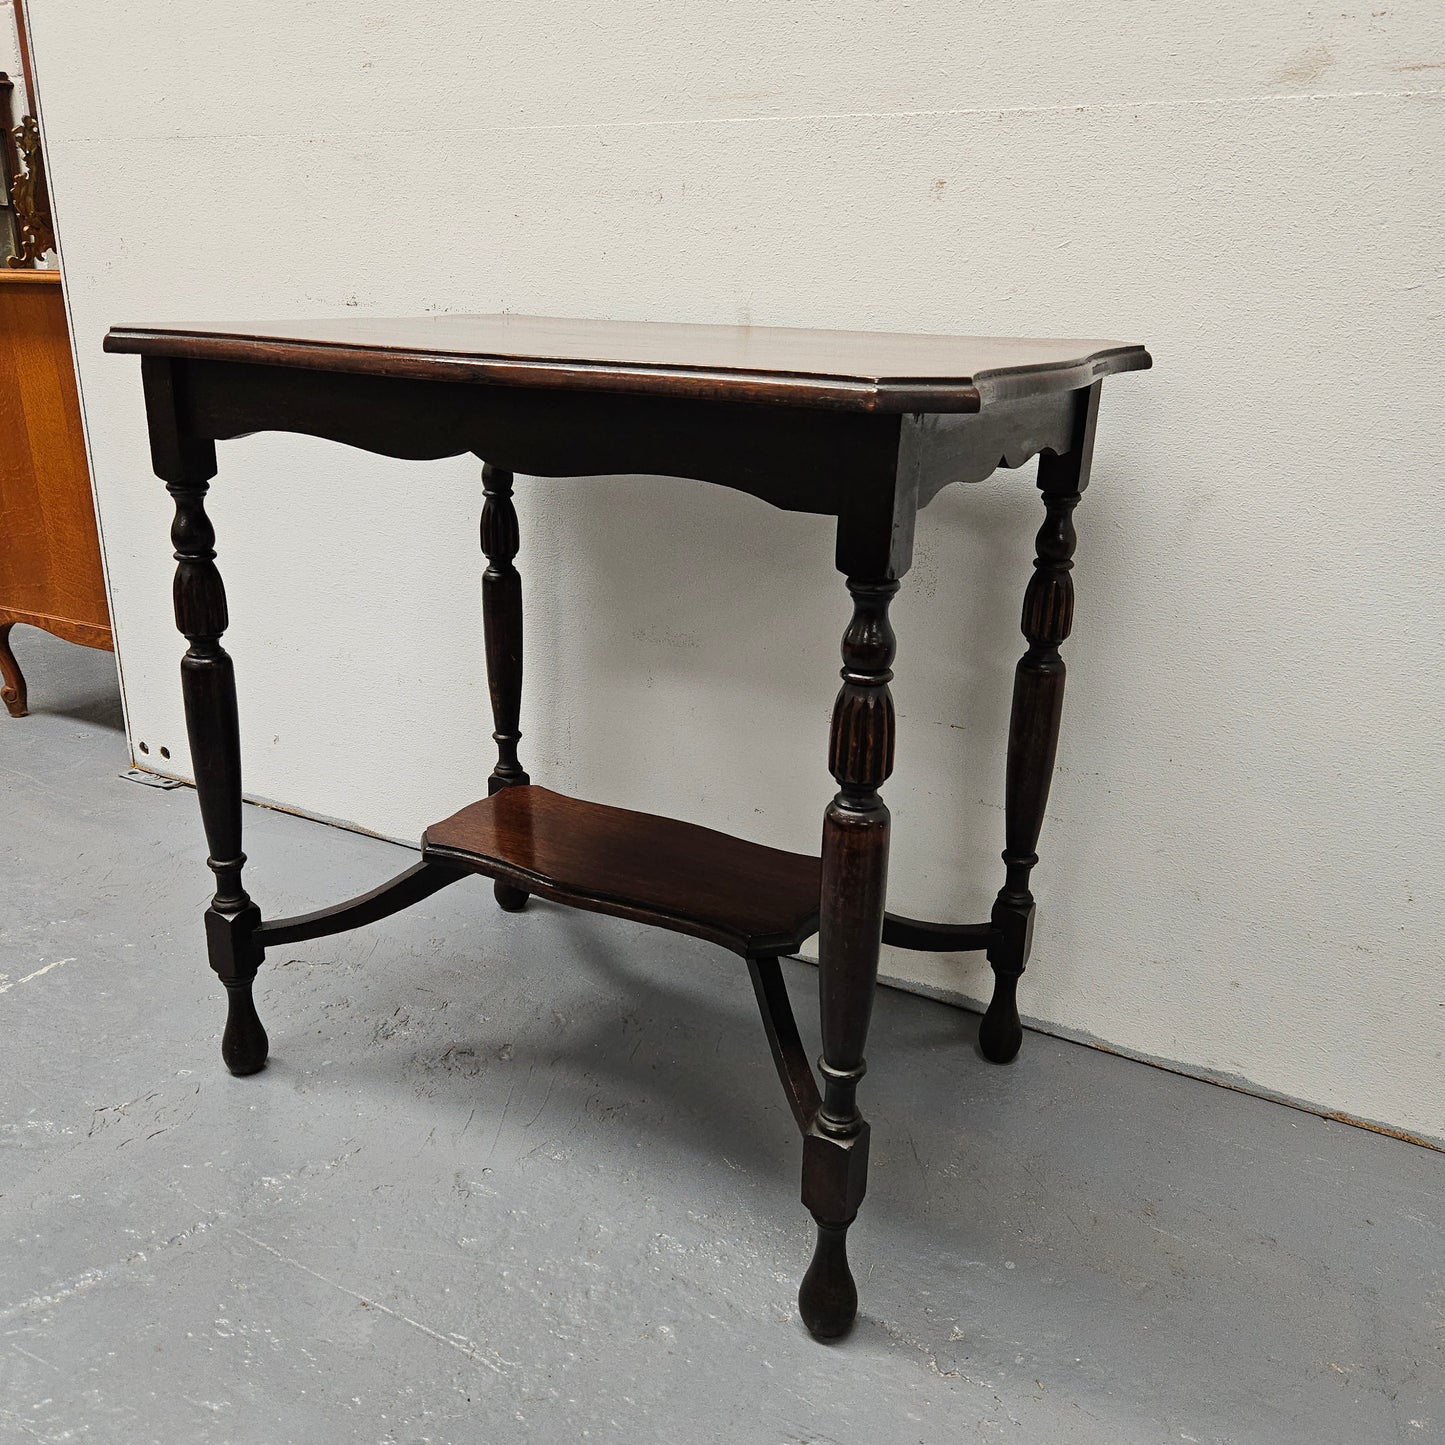 Tudor Style Occasional/Side Table